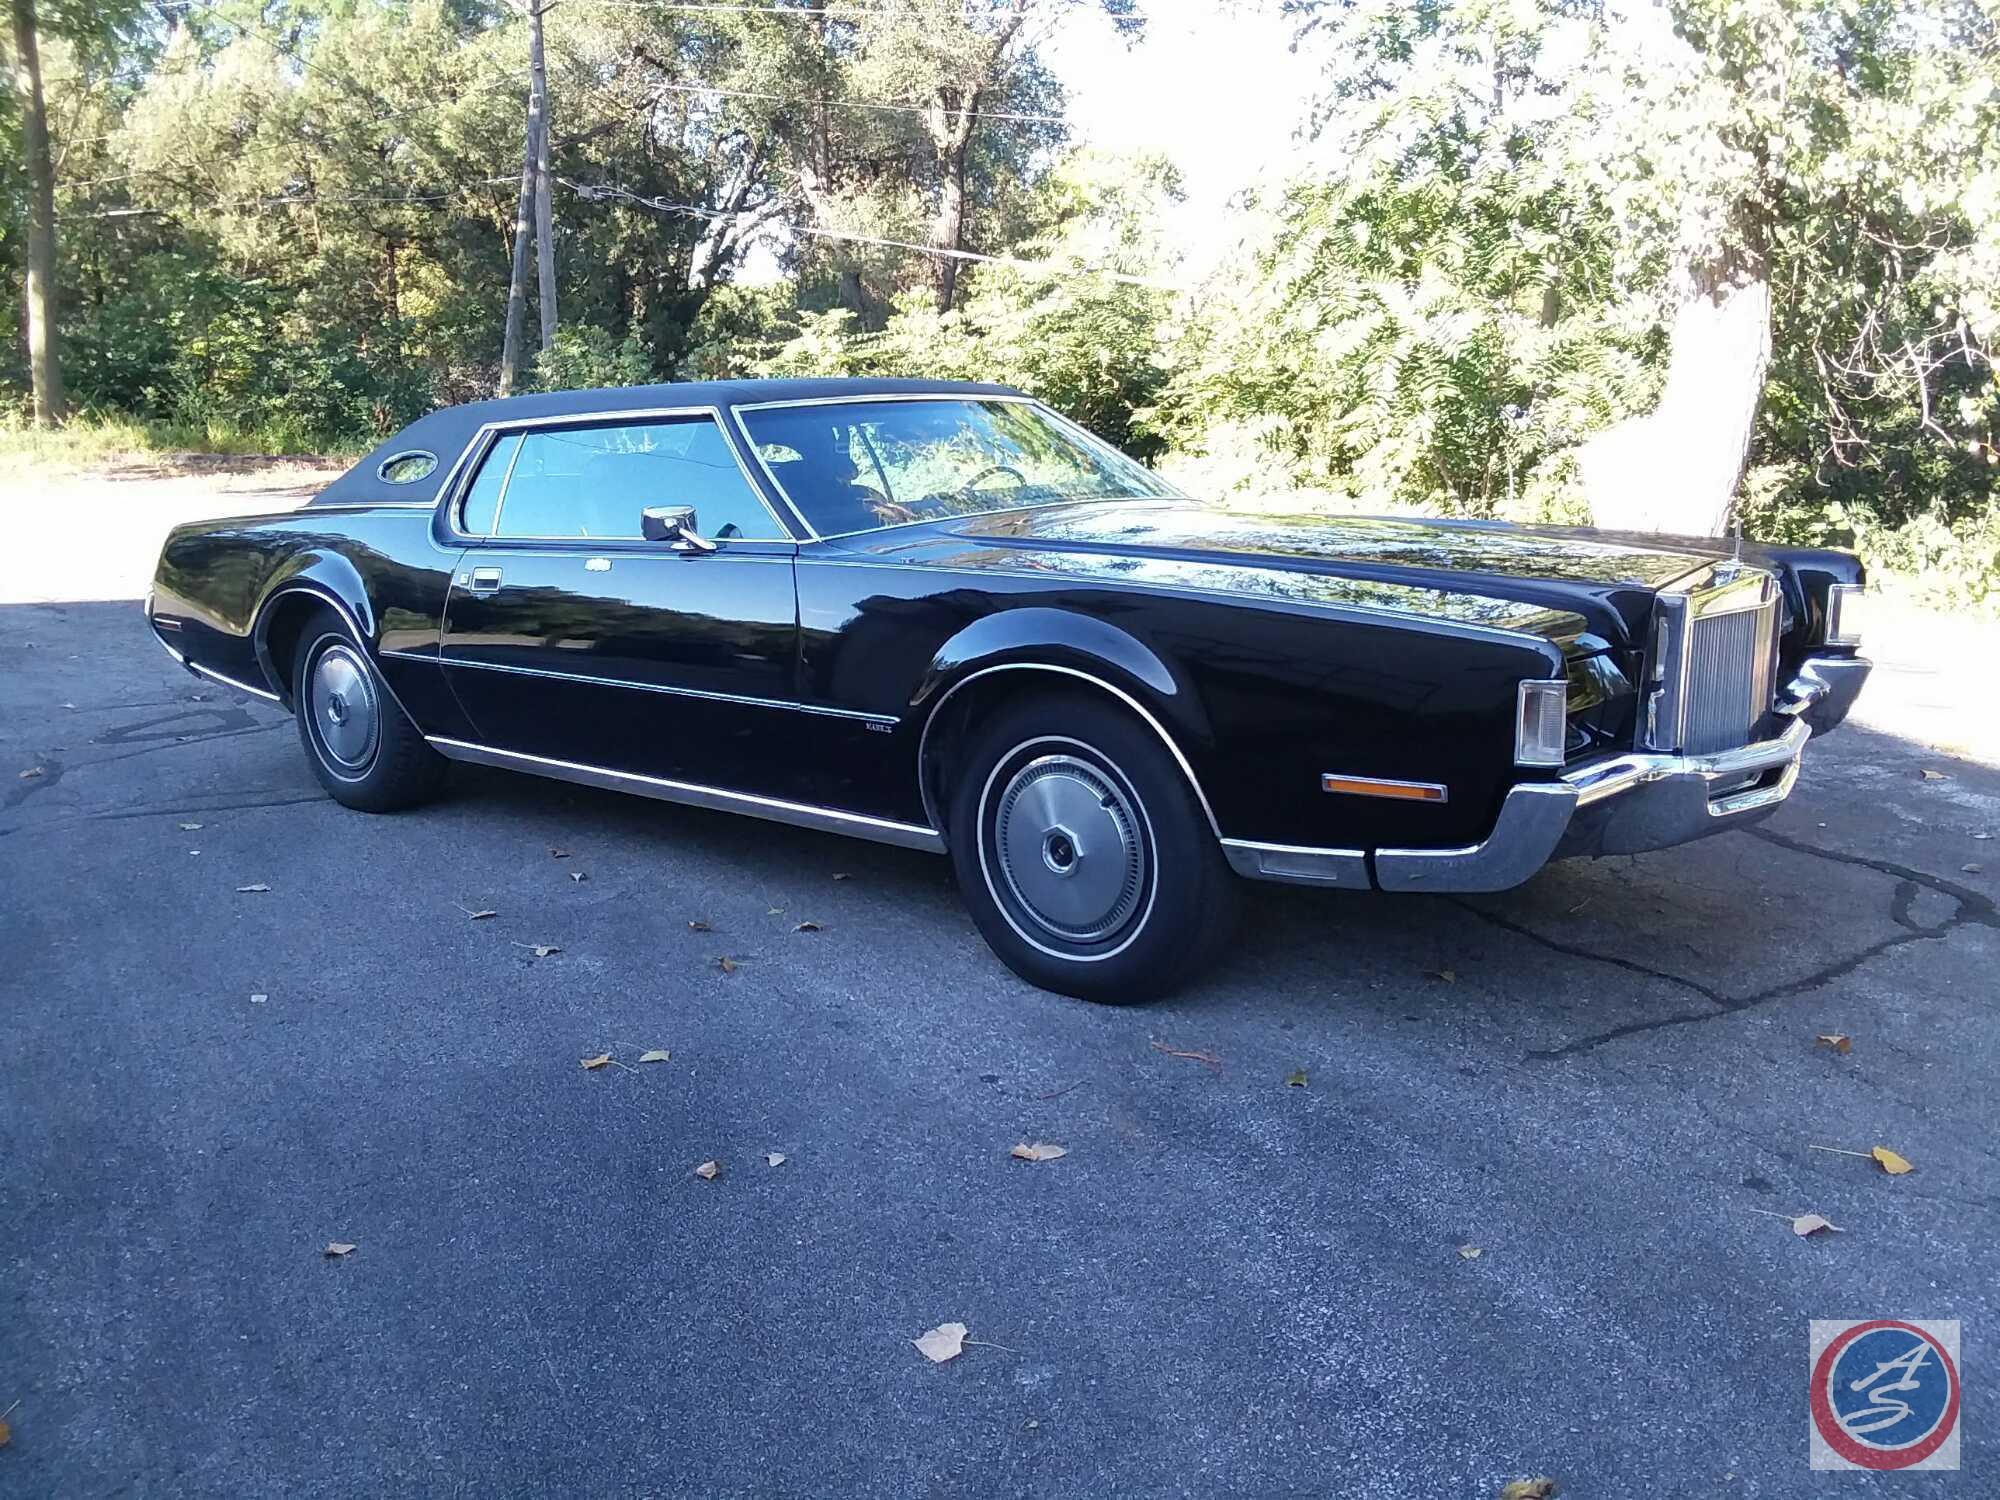 Year: 1972 Make: Lincoln Model: Continental Mark IV Vehicle Type: 2 Door Coupe Mileage: 06282 TMU